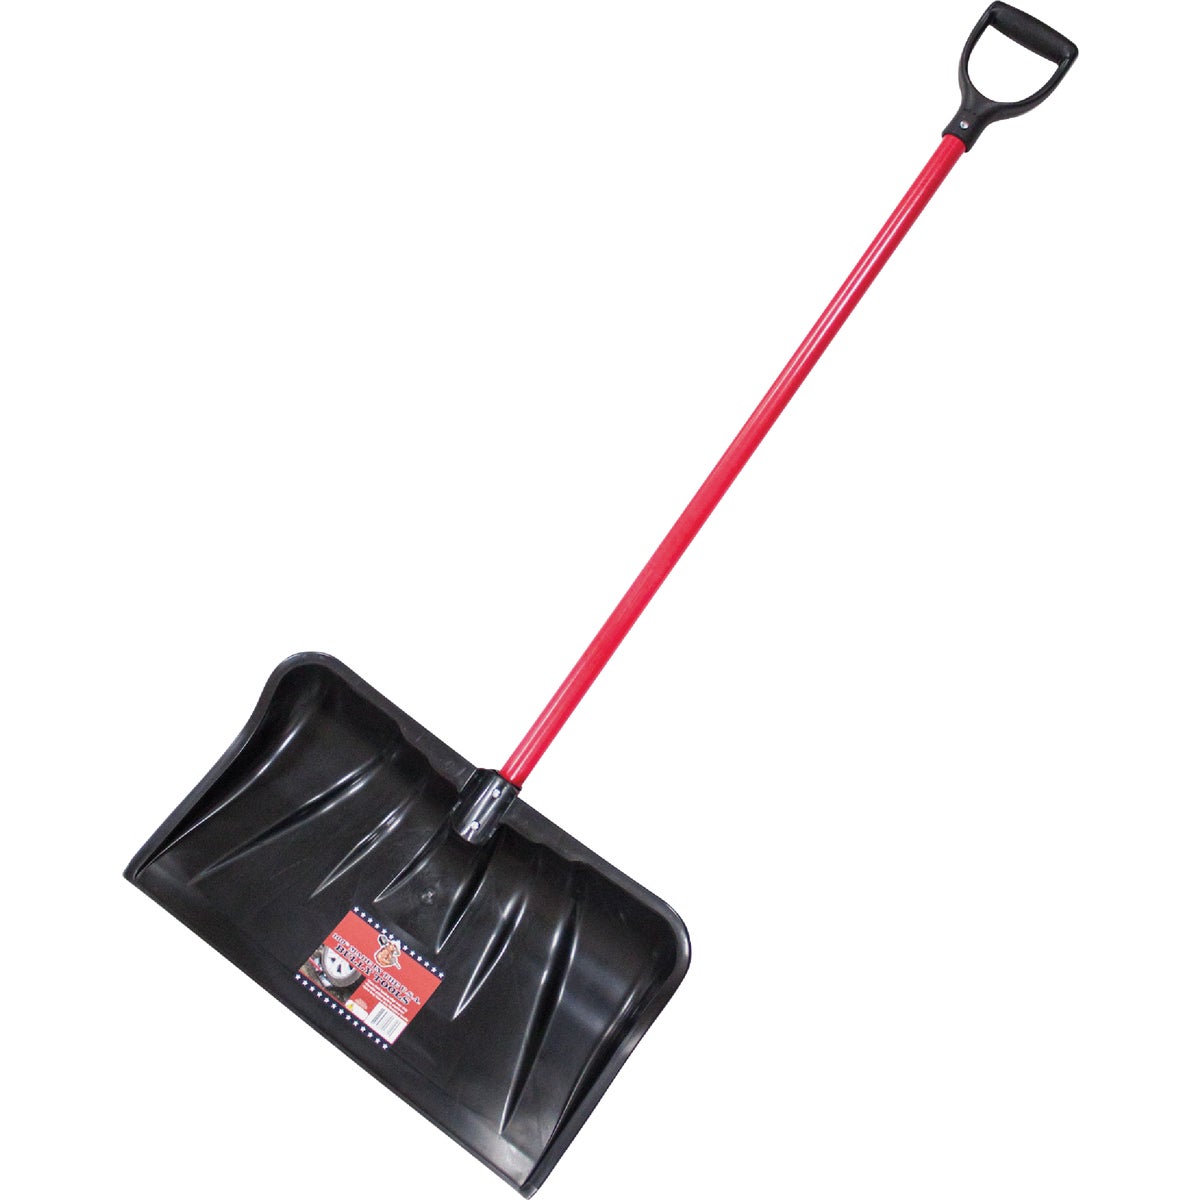 Item 704061, The Bully Tools 22 Combination Snow Shovel / Pusher with Fiberglass Handle 